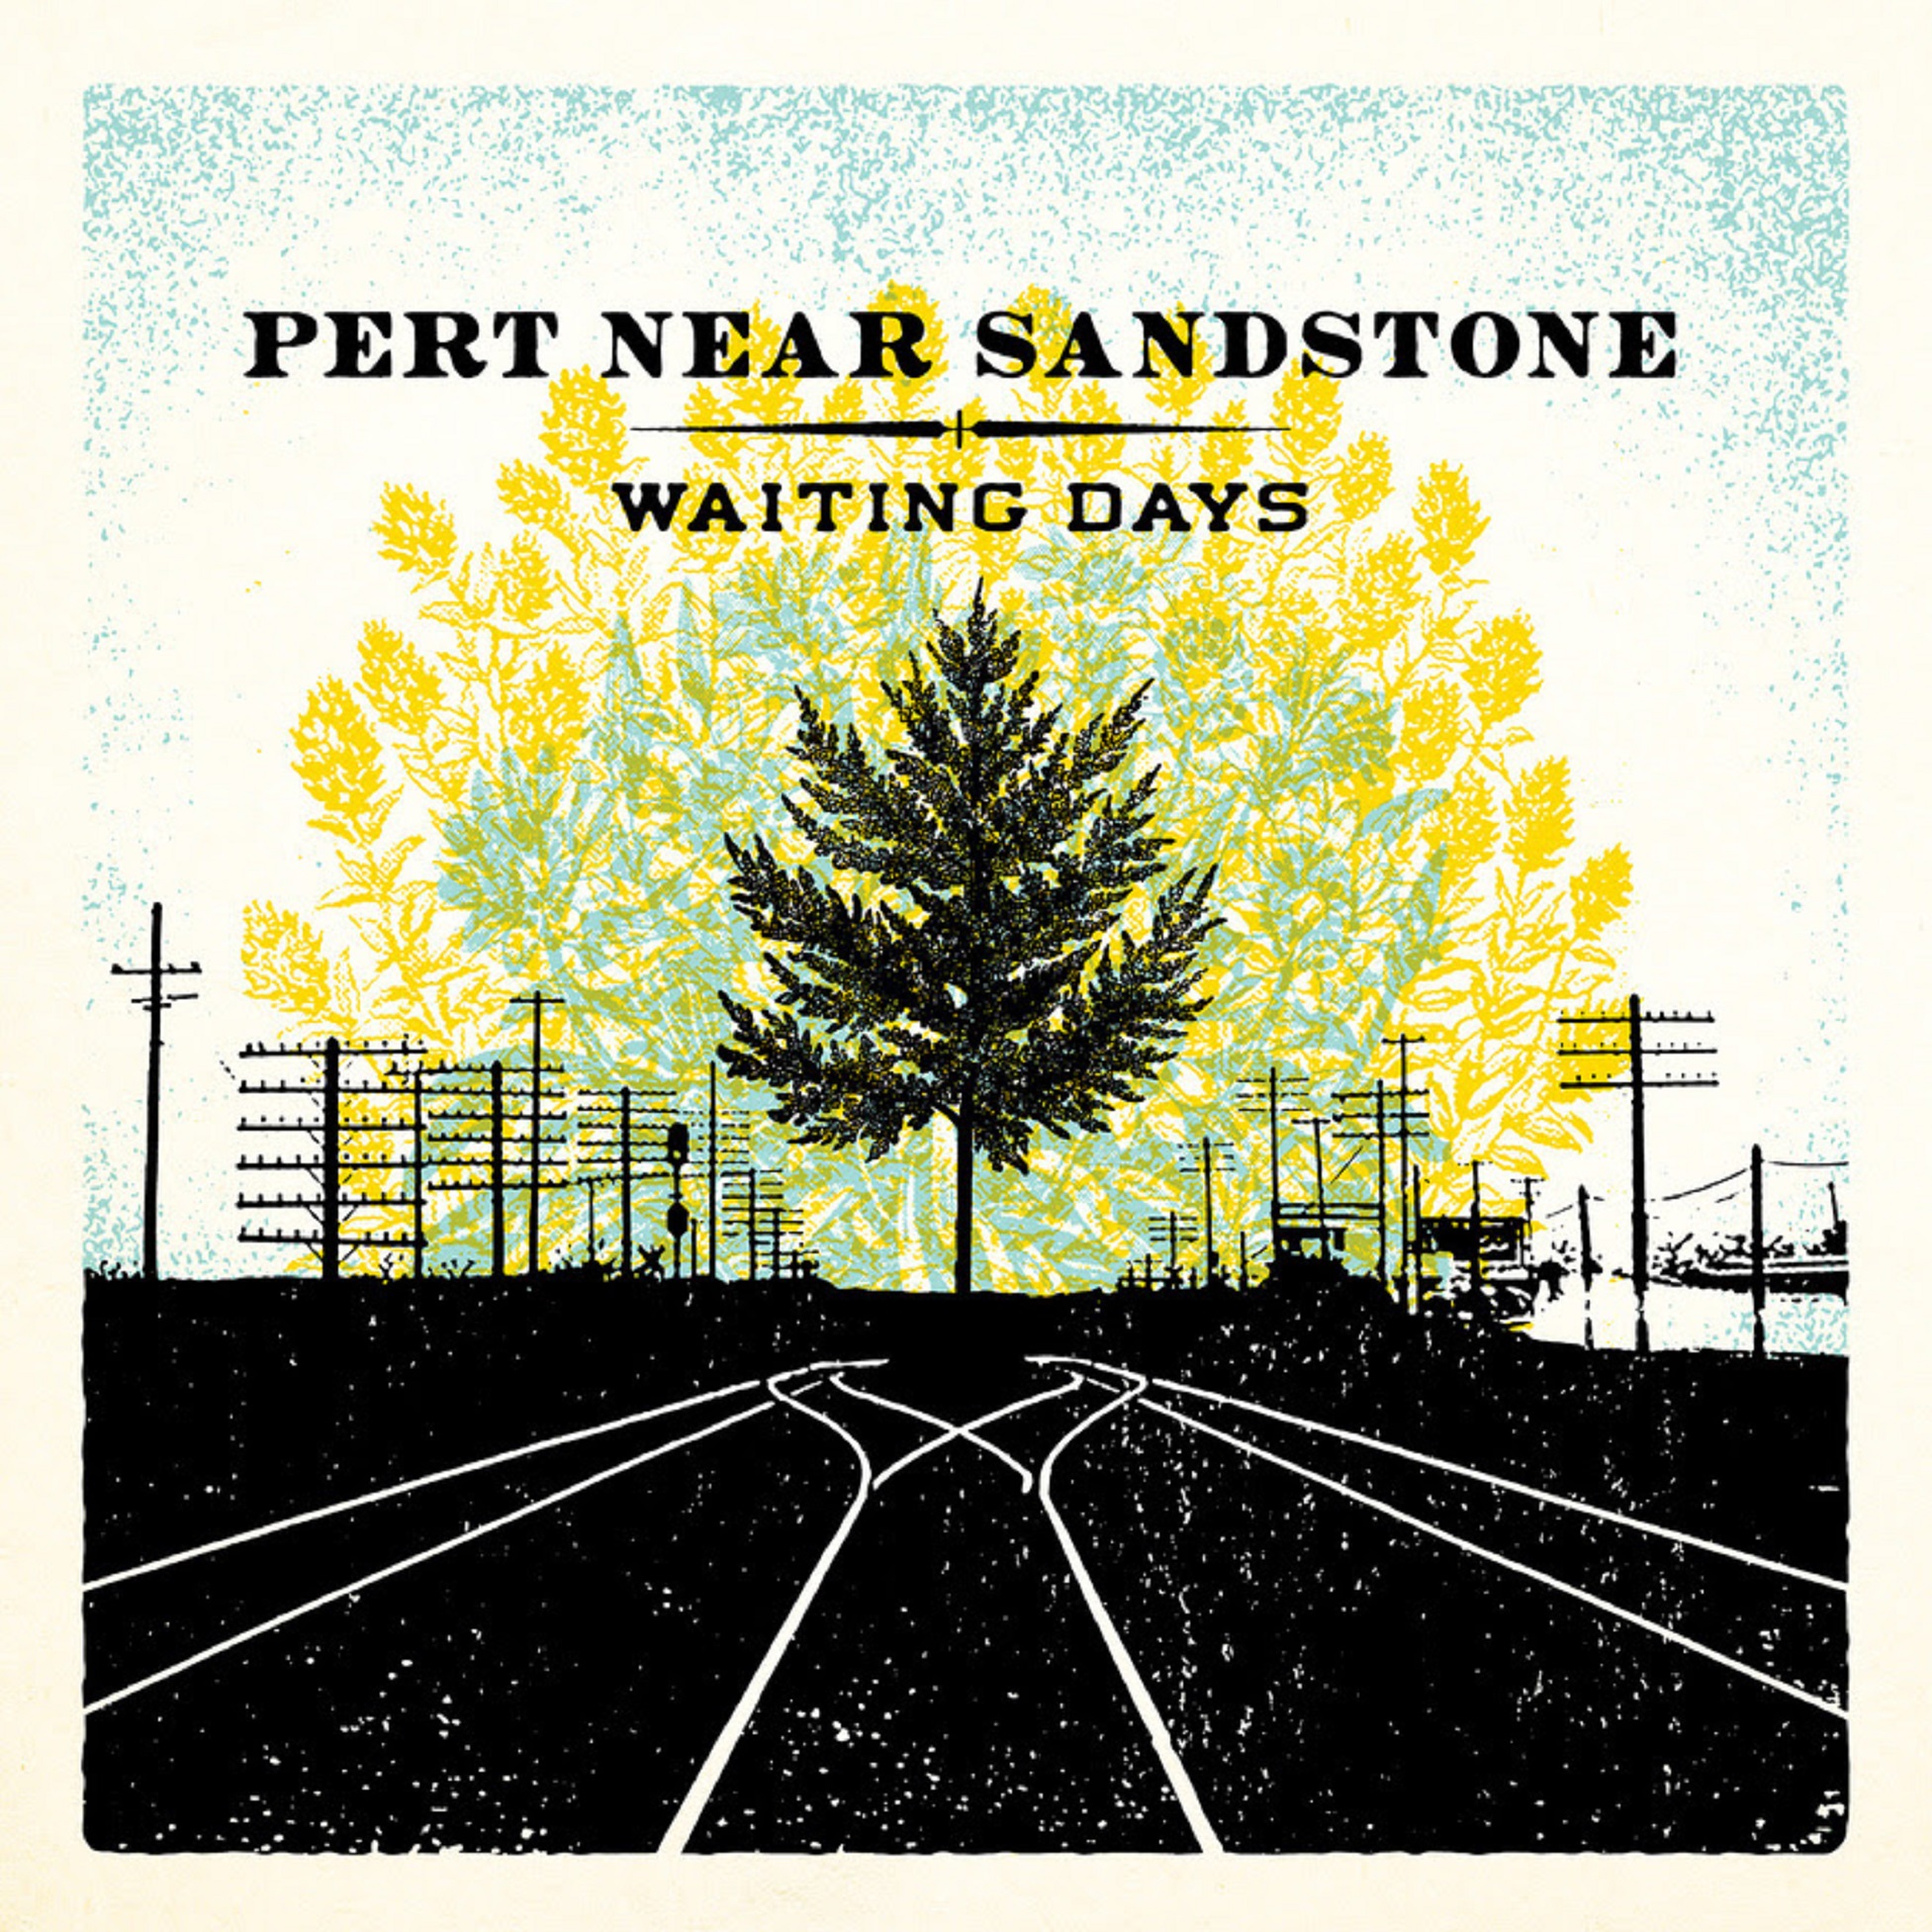 Pert Near Sandstone 1st Single From New Album “Waiting Days” + Tour Dates Announced